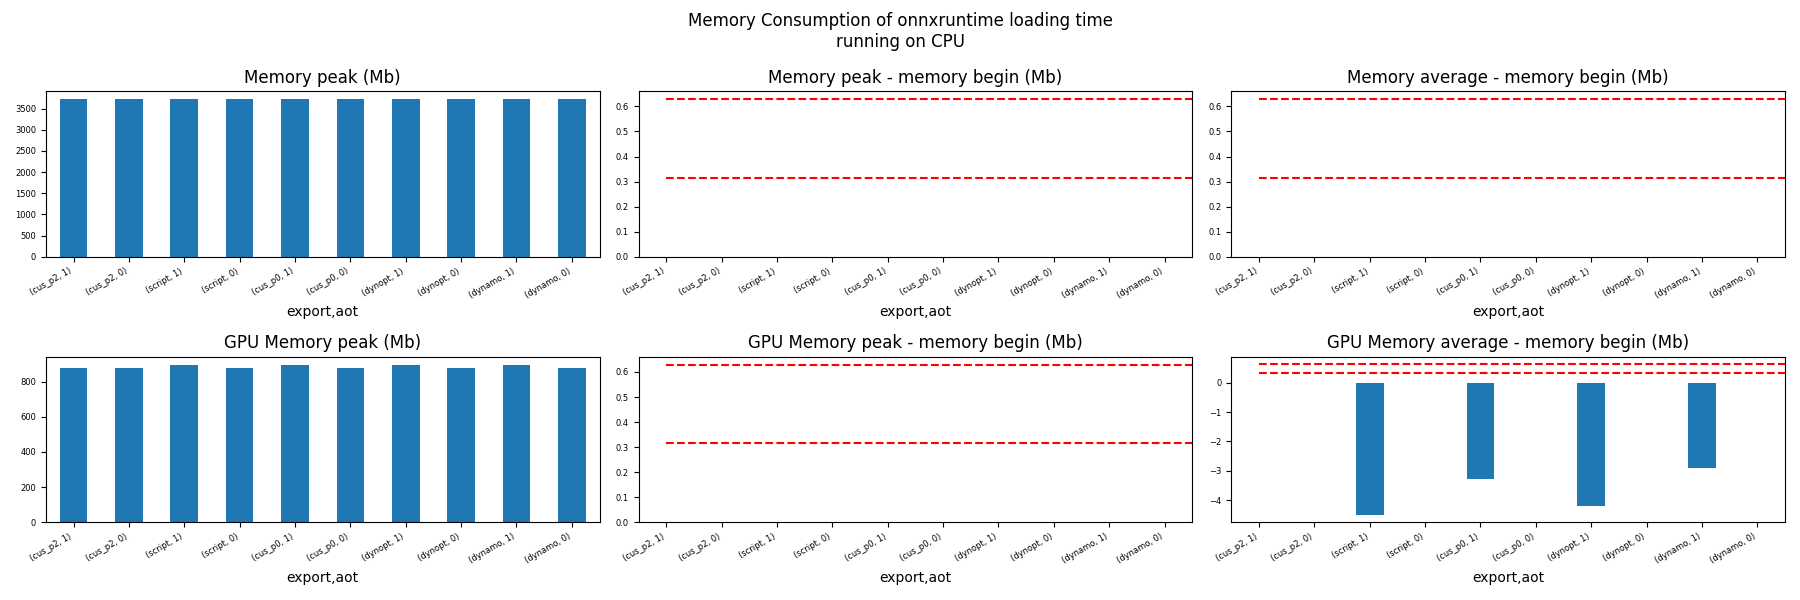 Memory Consumption of onnxruntime loading time running on CPU, Memory peak (Mb), Memory peak - memory begin (Mb), Memory average - memory begin (Mb), GPU Memory peak (Mb), GPU Memory peak - memory begin (Mb), GPU Memory average - memory begin (Mb)